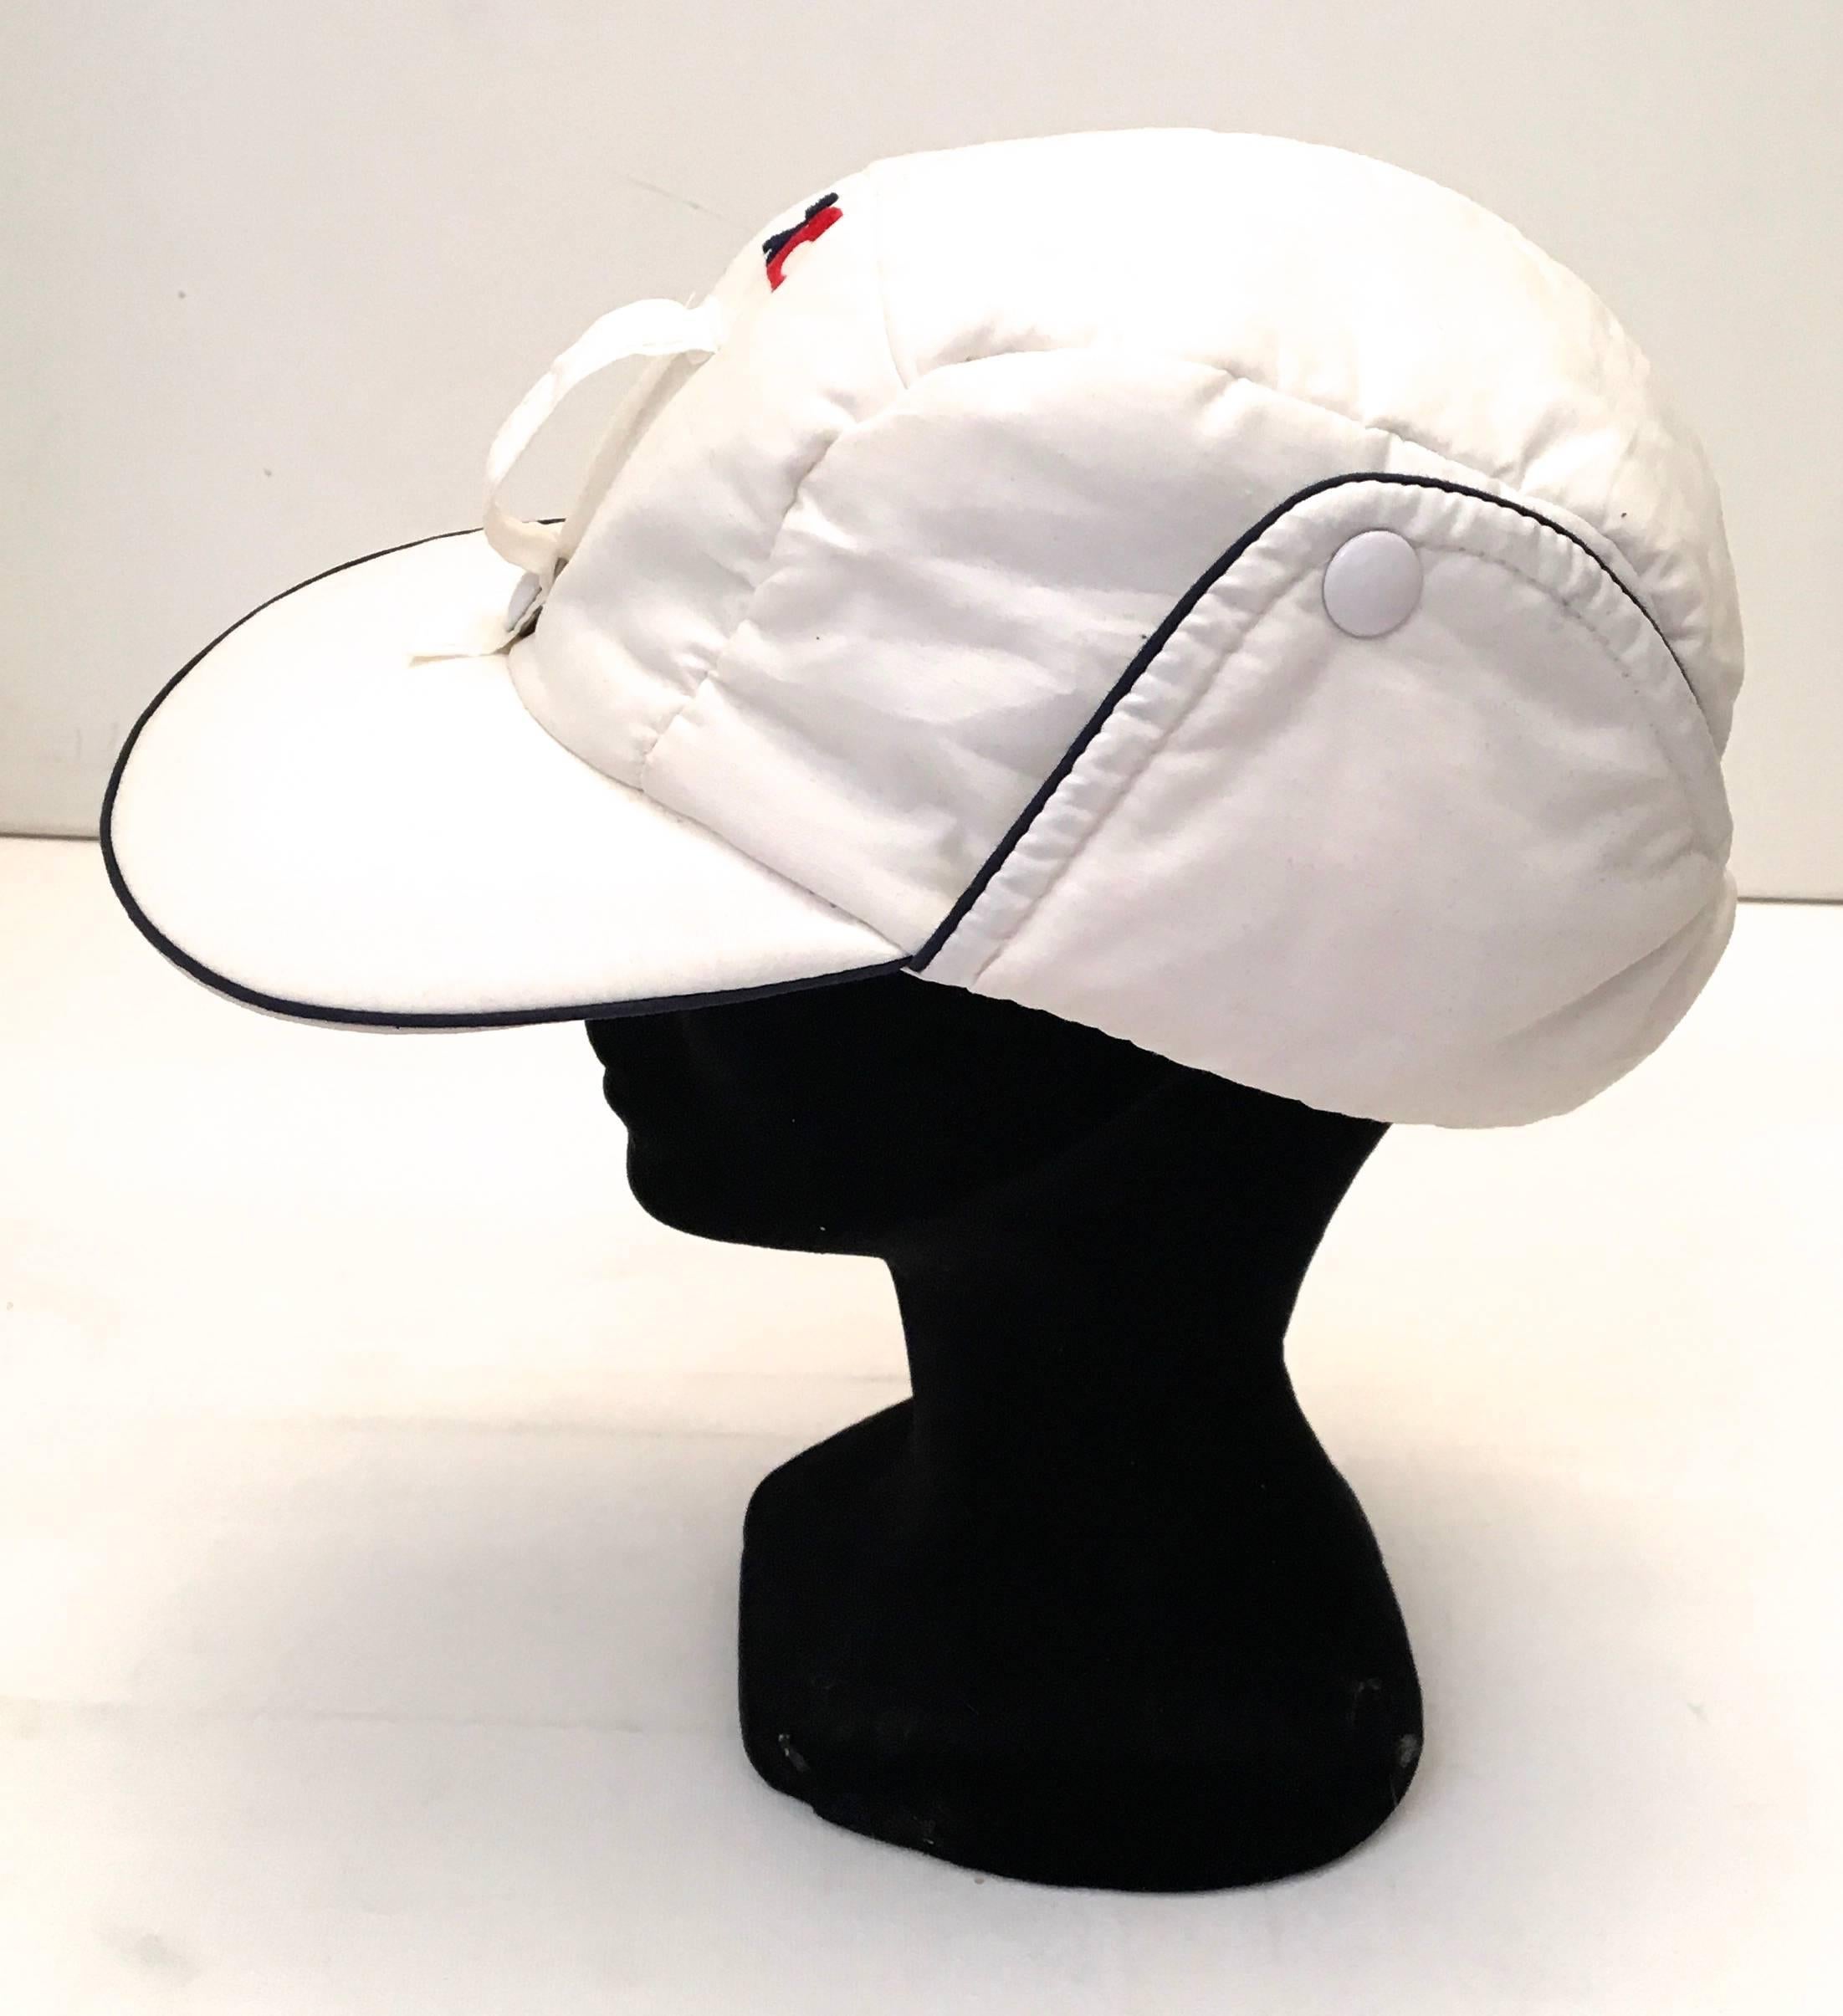 Presented here is a beautiful hat from Courreges. The white in the hat which is a blend of 30% nylon, 35% cotton and 30% polynosique feels like a typical ski cap hat. There are button snaps and velcro that allow for a few different styles of wear.